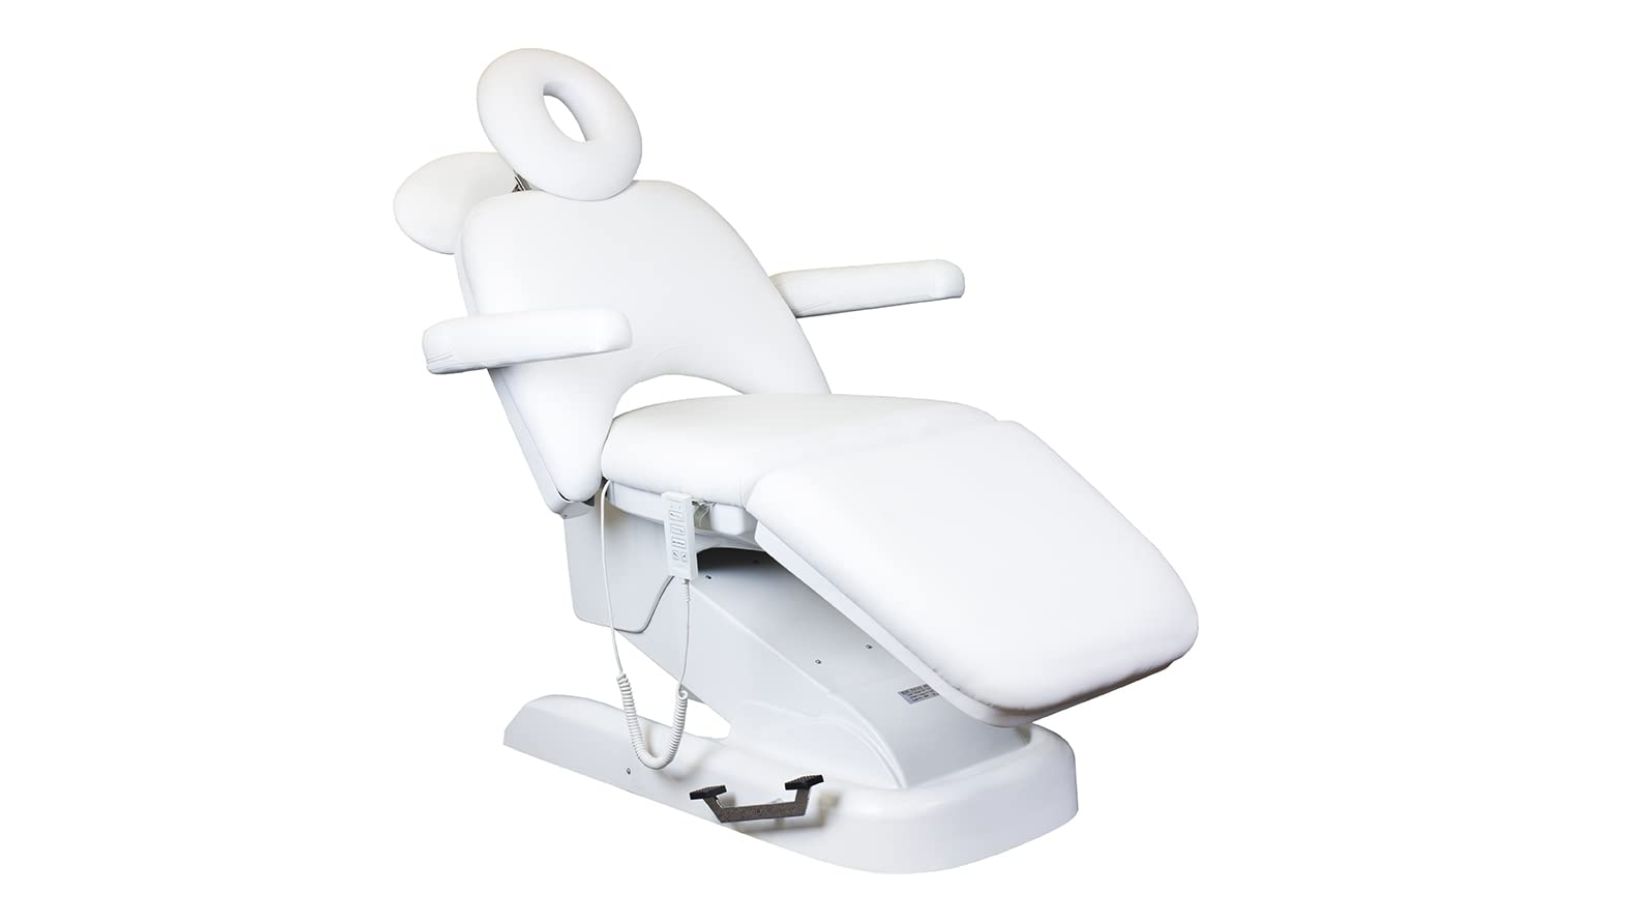 What To Look for In a Facial Spa Chair?